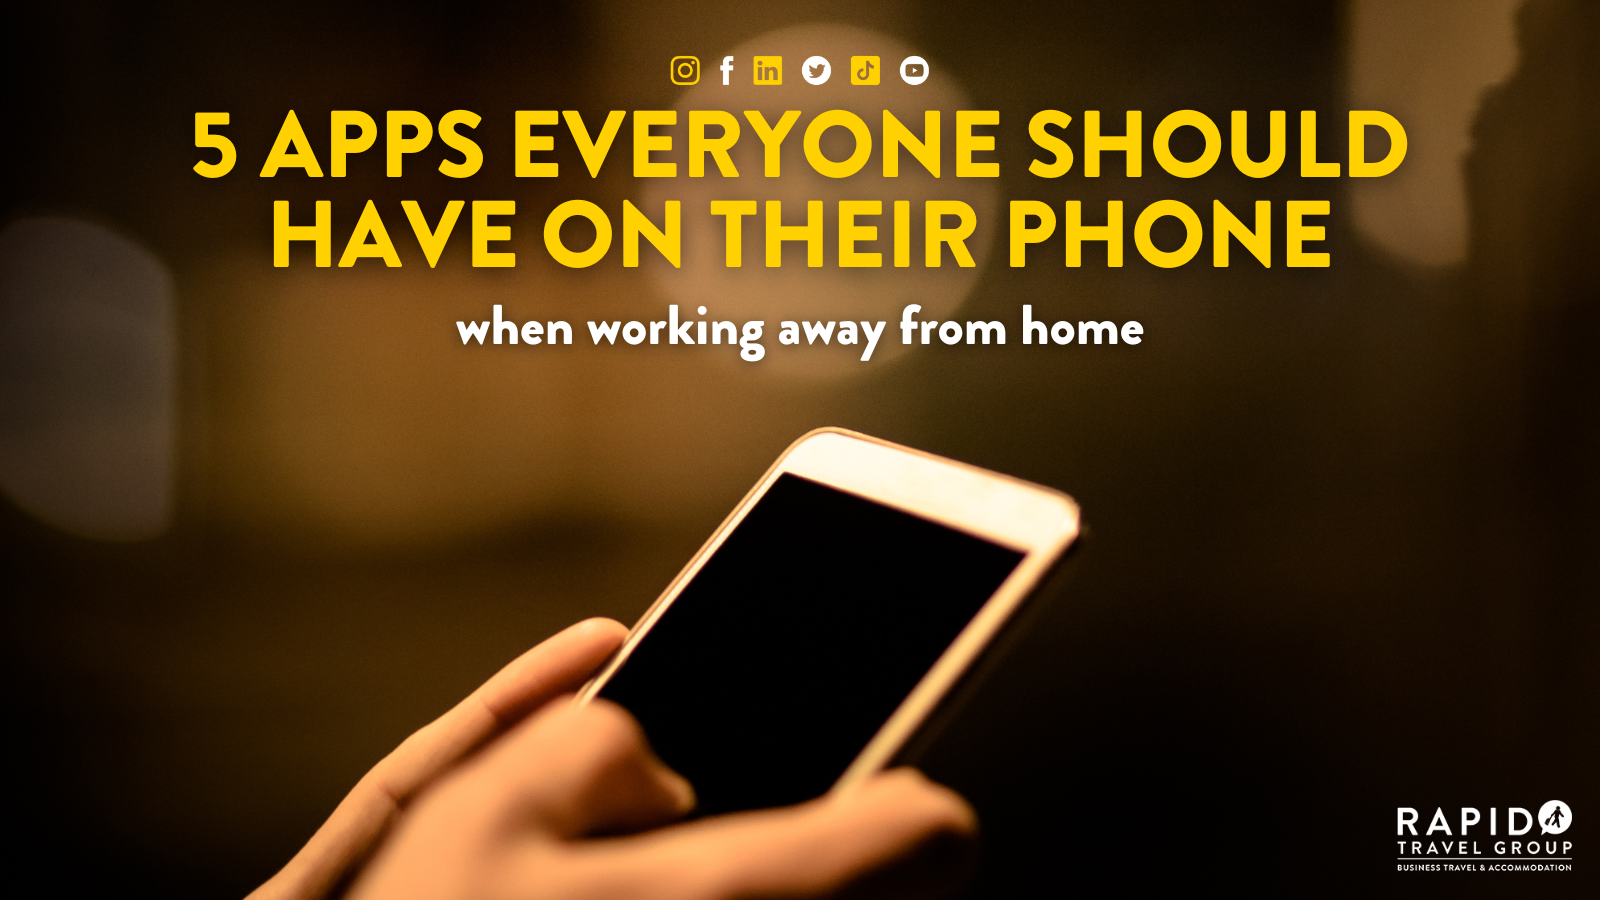 5 apps everyone should have on their phone when working away from home